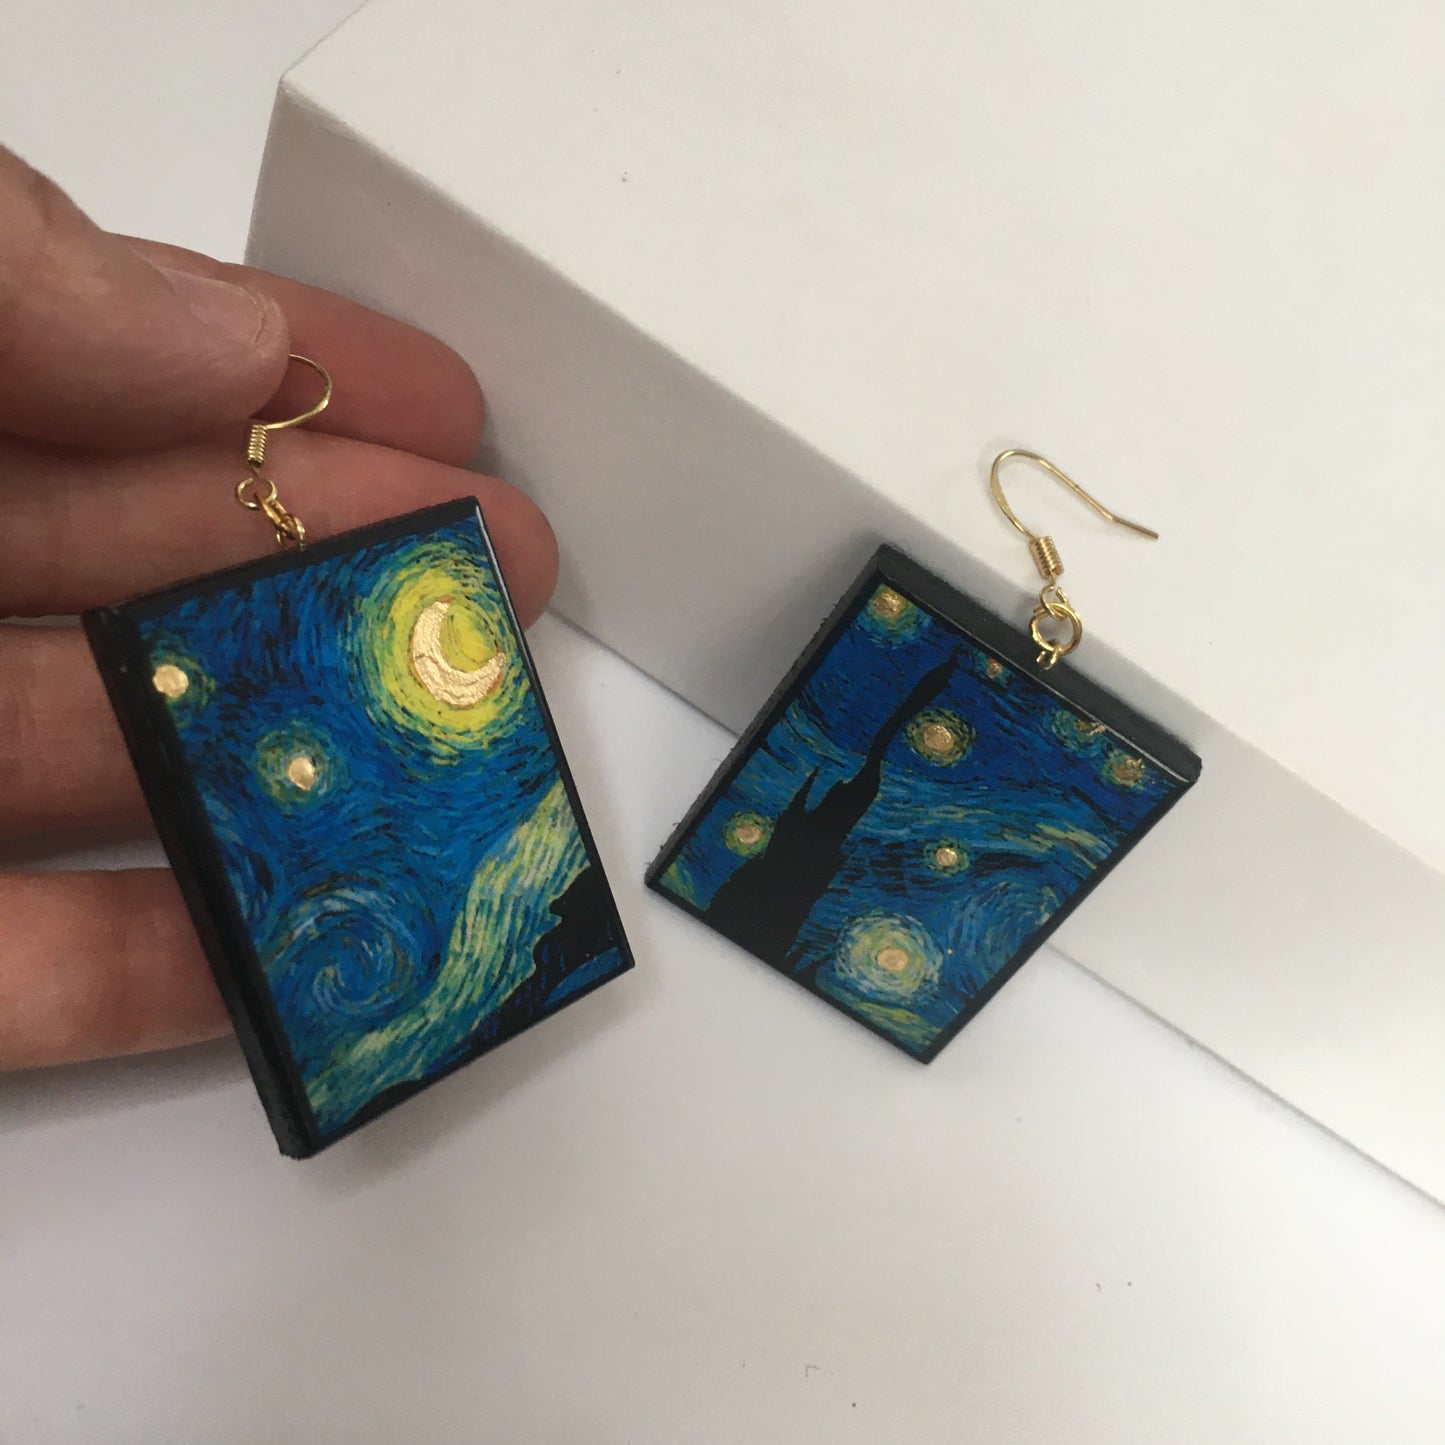 Earrings shaped rectangular with some art details in gold leaf inspired by Vincent Van Gogh's "Starry Night" painting. Blue sky and gold little stars dangle earrings in sustainable wood. Handmade by Obljewellery